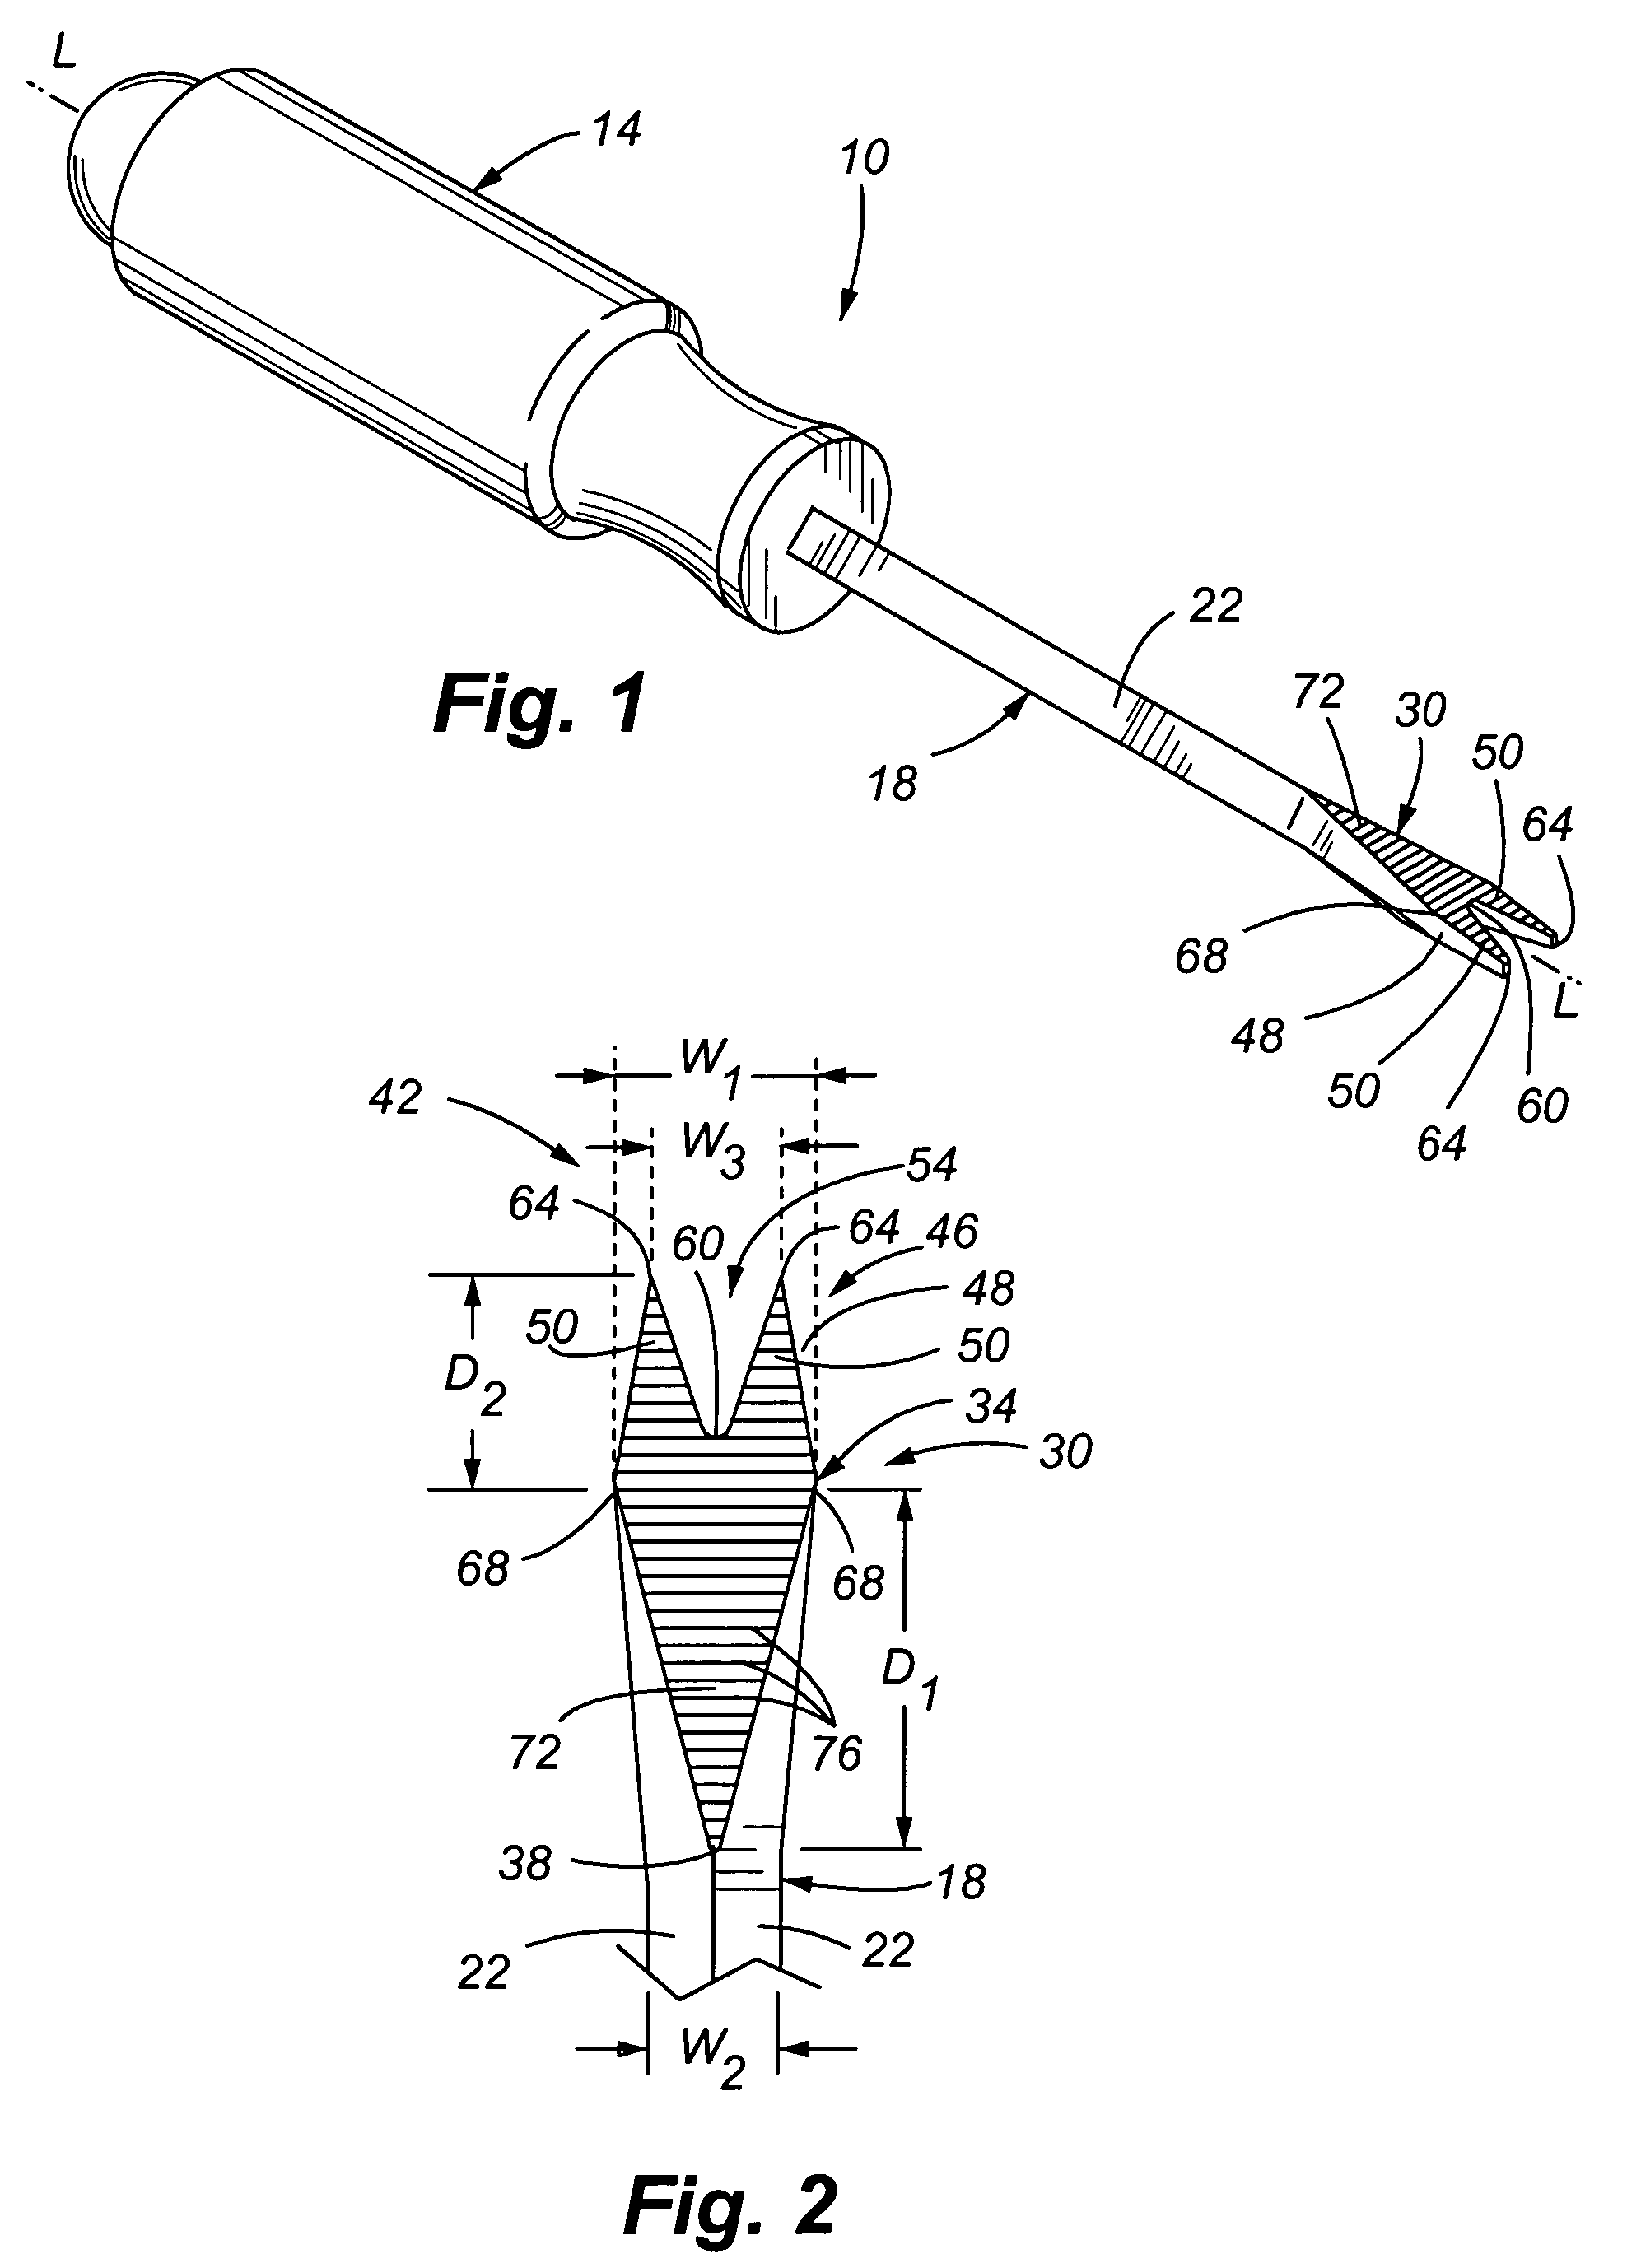 Staple removal tool